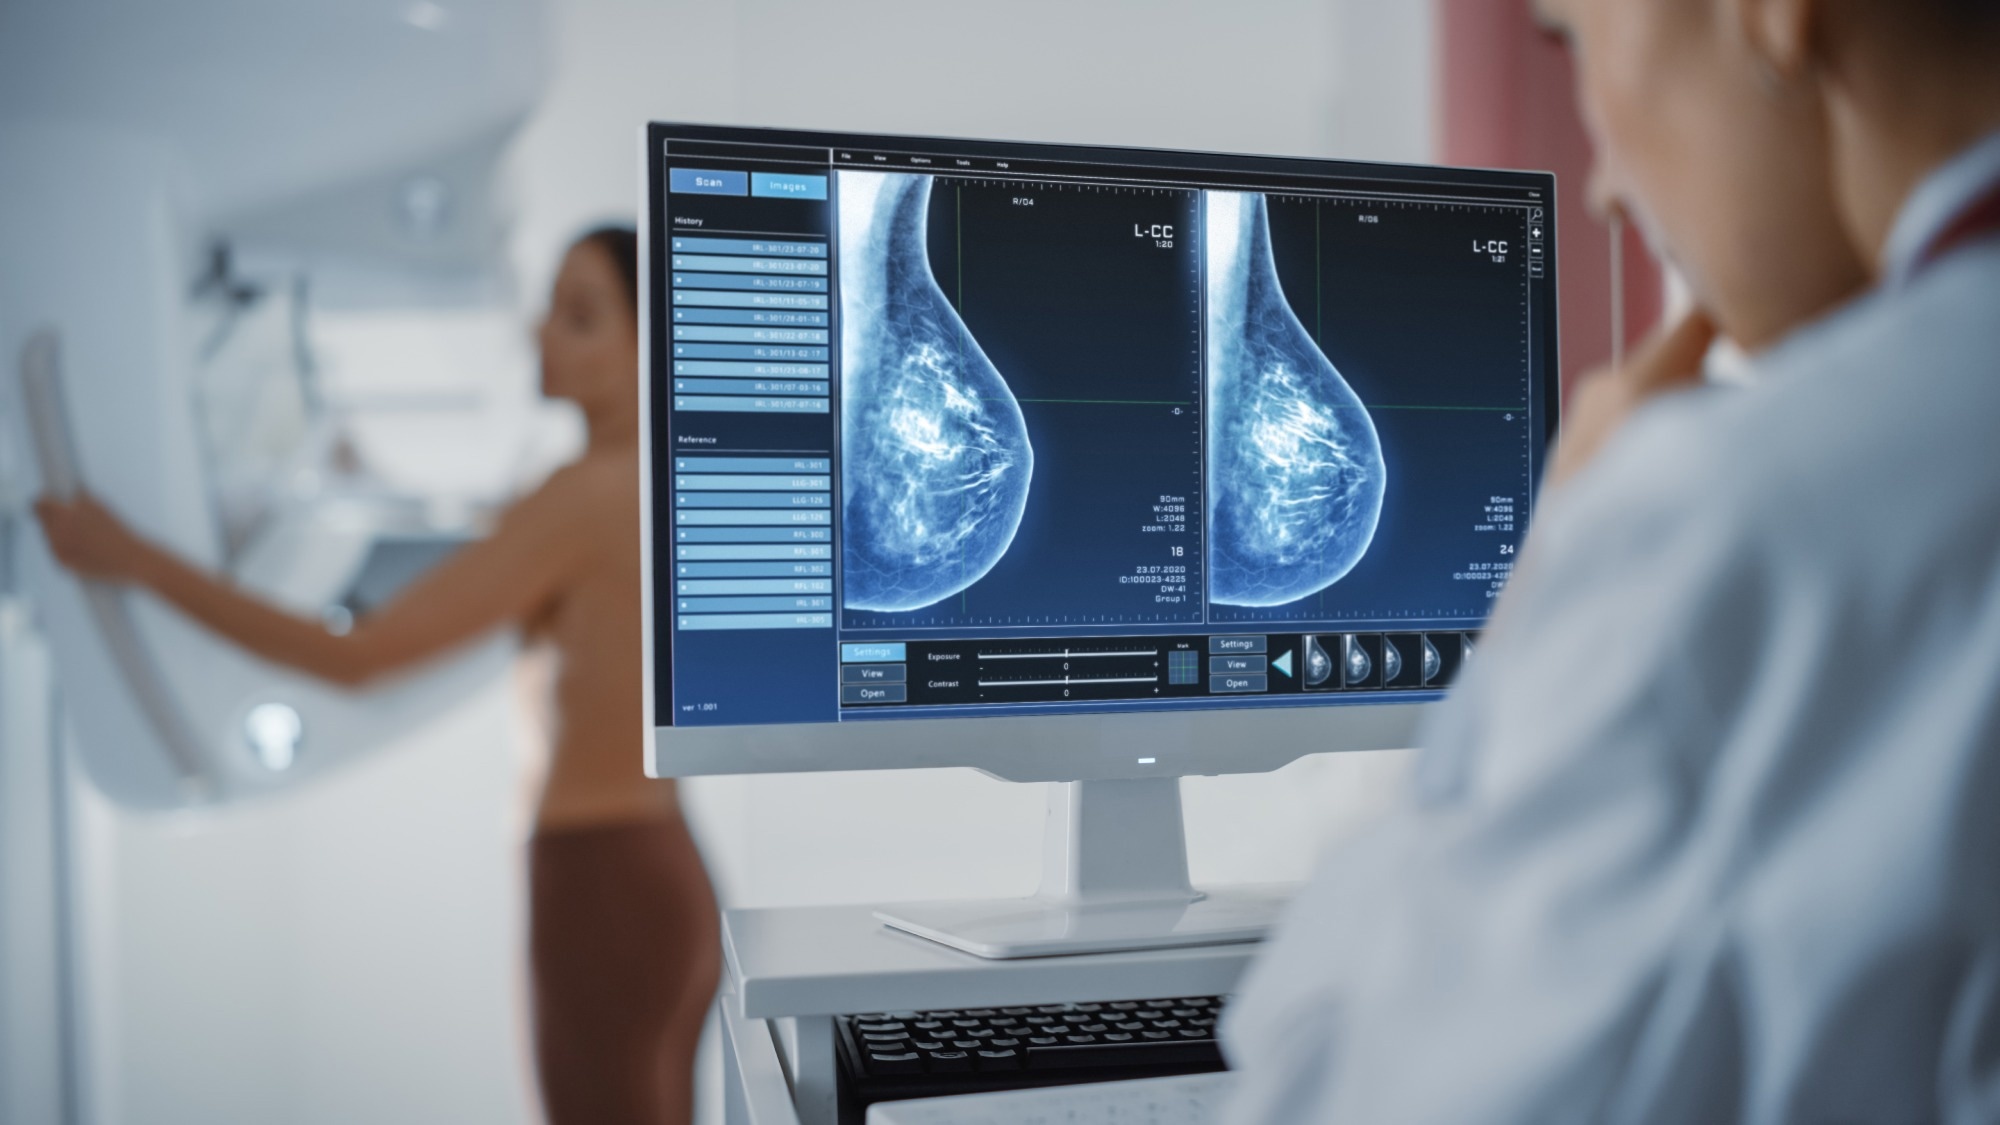 Study: Analysis of Breast Cancer Mortality in the US—1975 to 2019. Image Credit: Gorodenkoff/Shutterstock.com